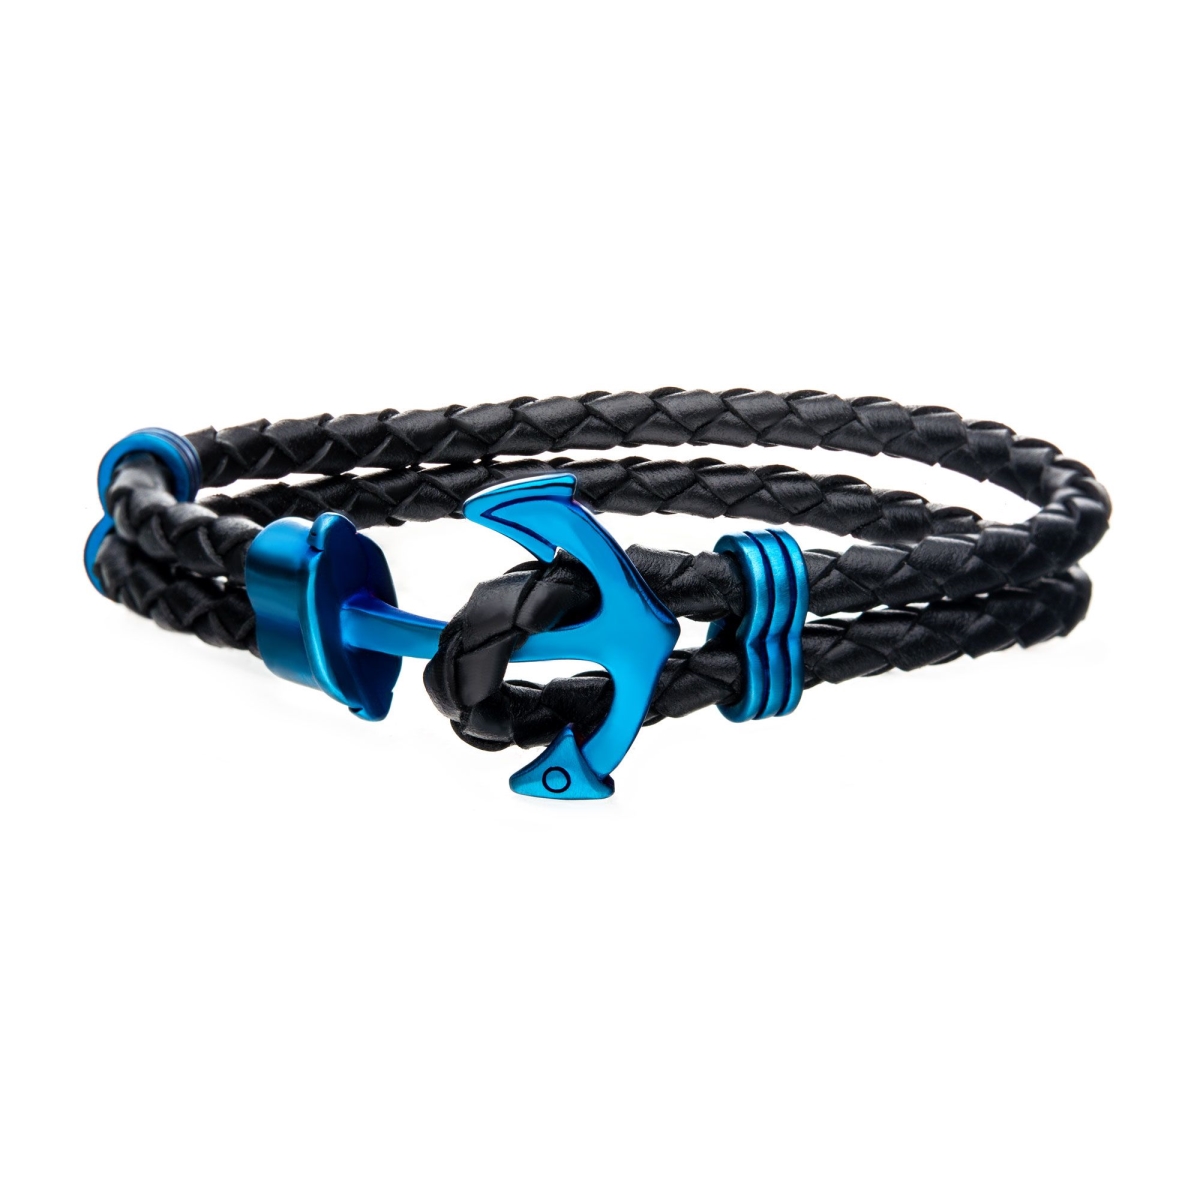 Br19507b 8.5 In. Mens Anchor Bracelet - Black Leather With Blue Ip